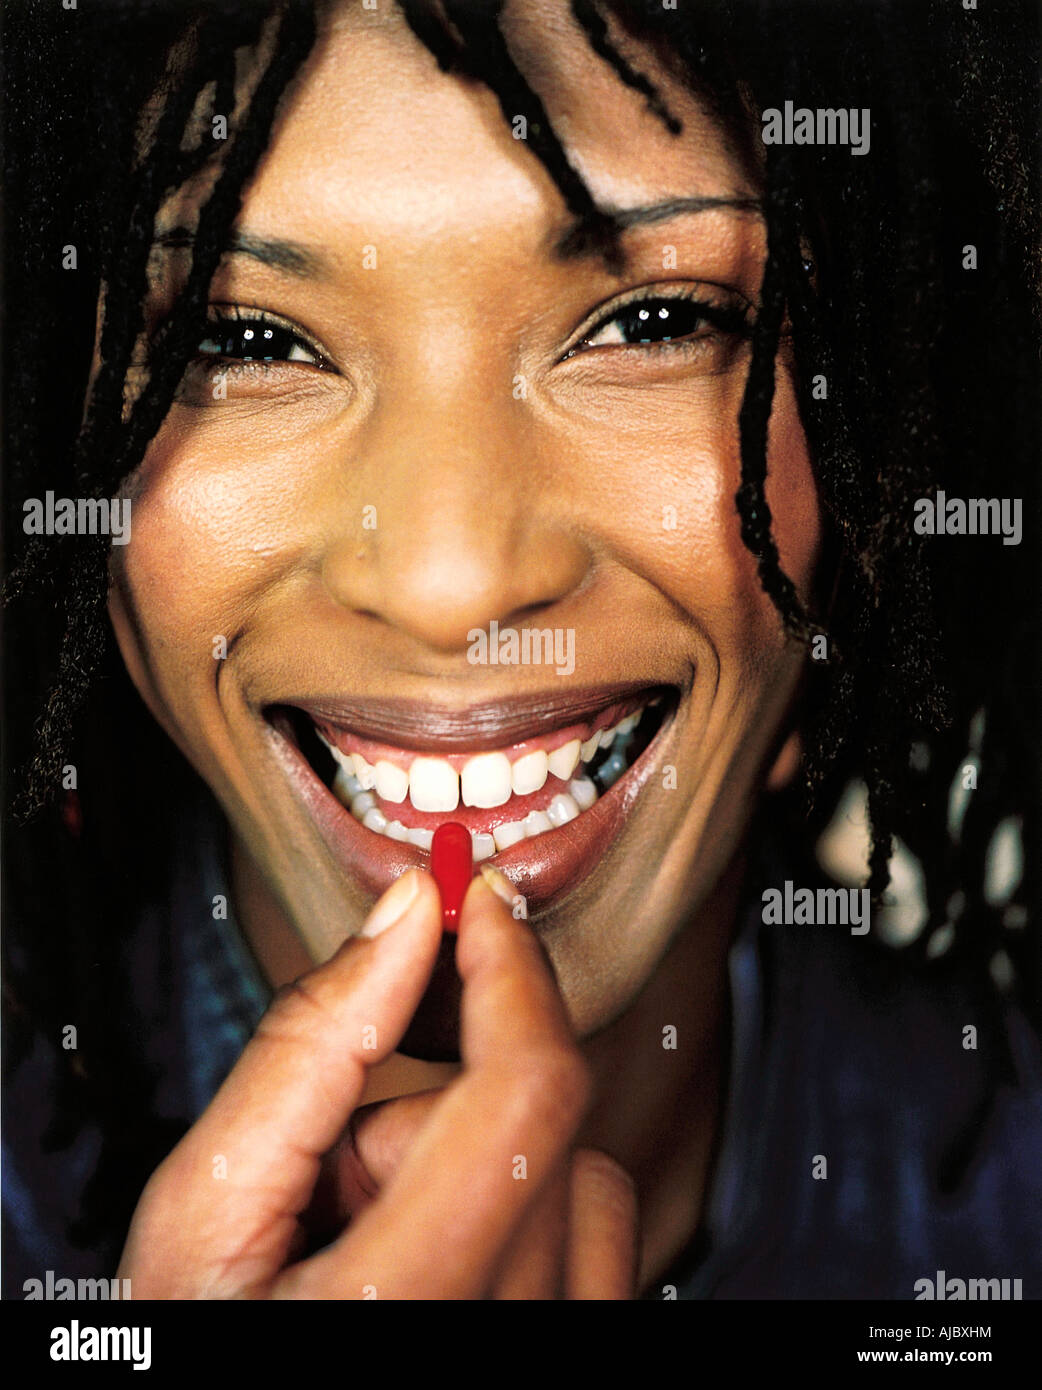 African Woman Holding a Pill (Capsule) Between Her Teeth Stock Photo